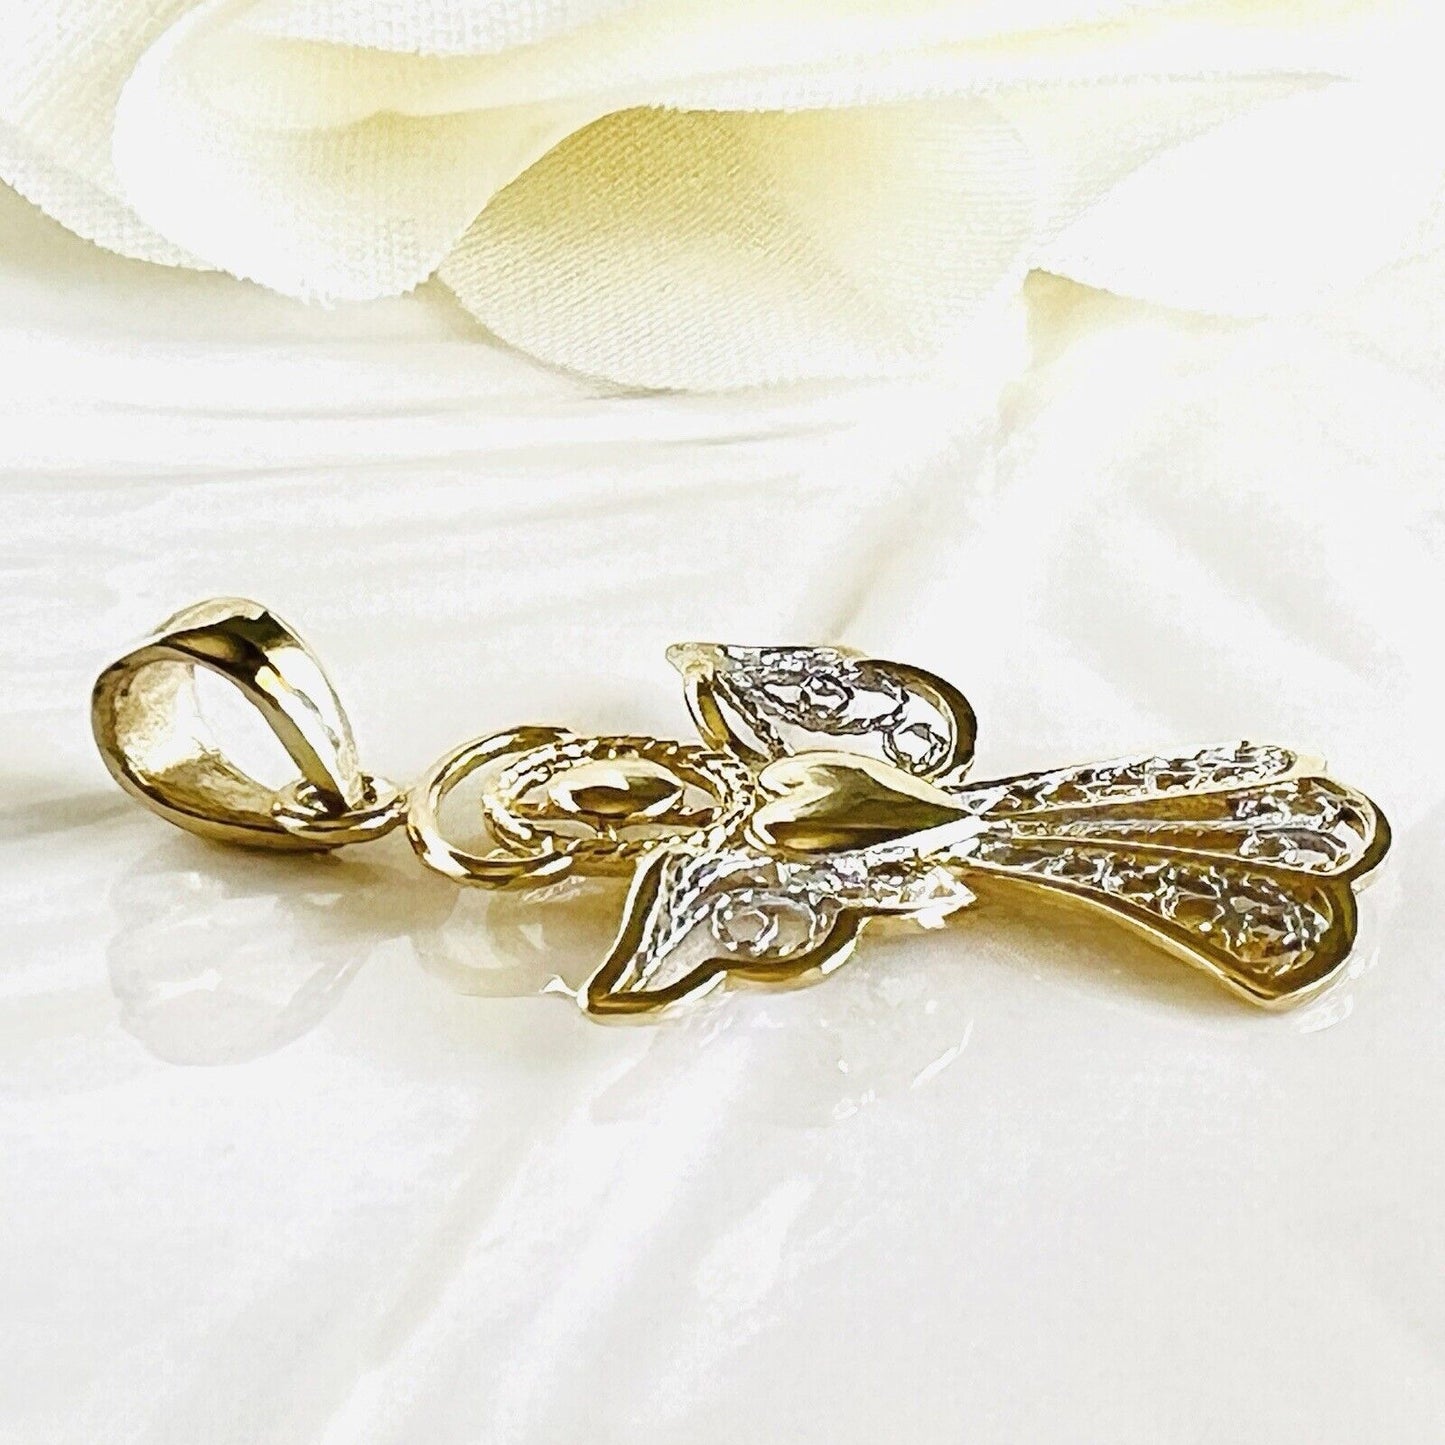 Solid 14k Yellow & White Gold Filigree Guardian Angel Pendant, New